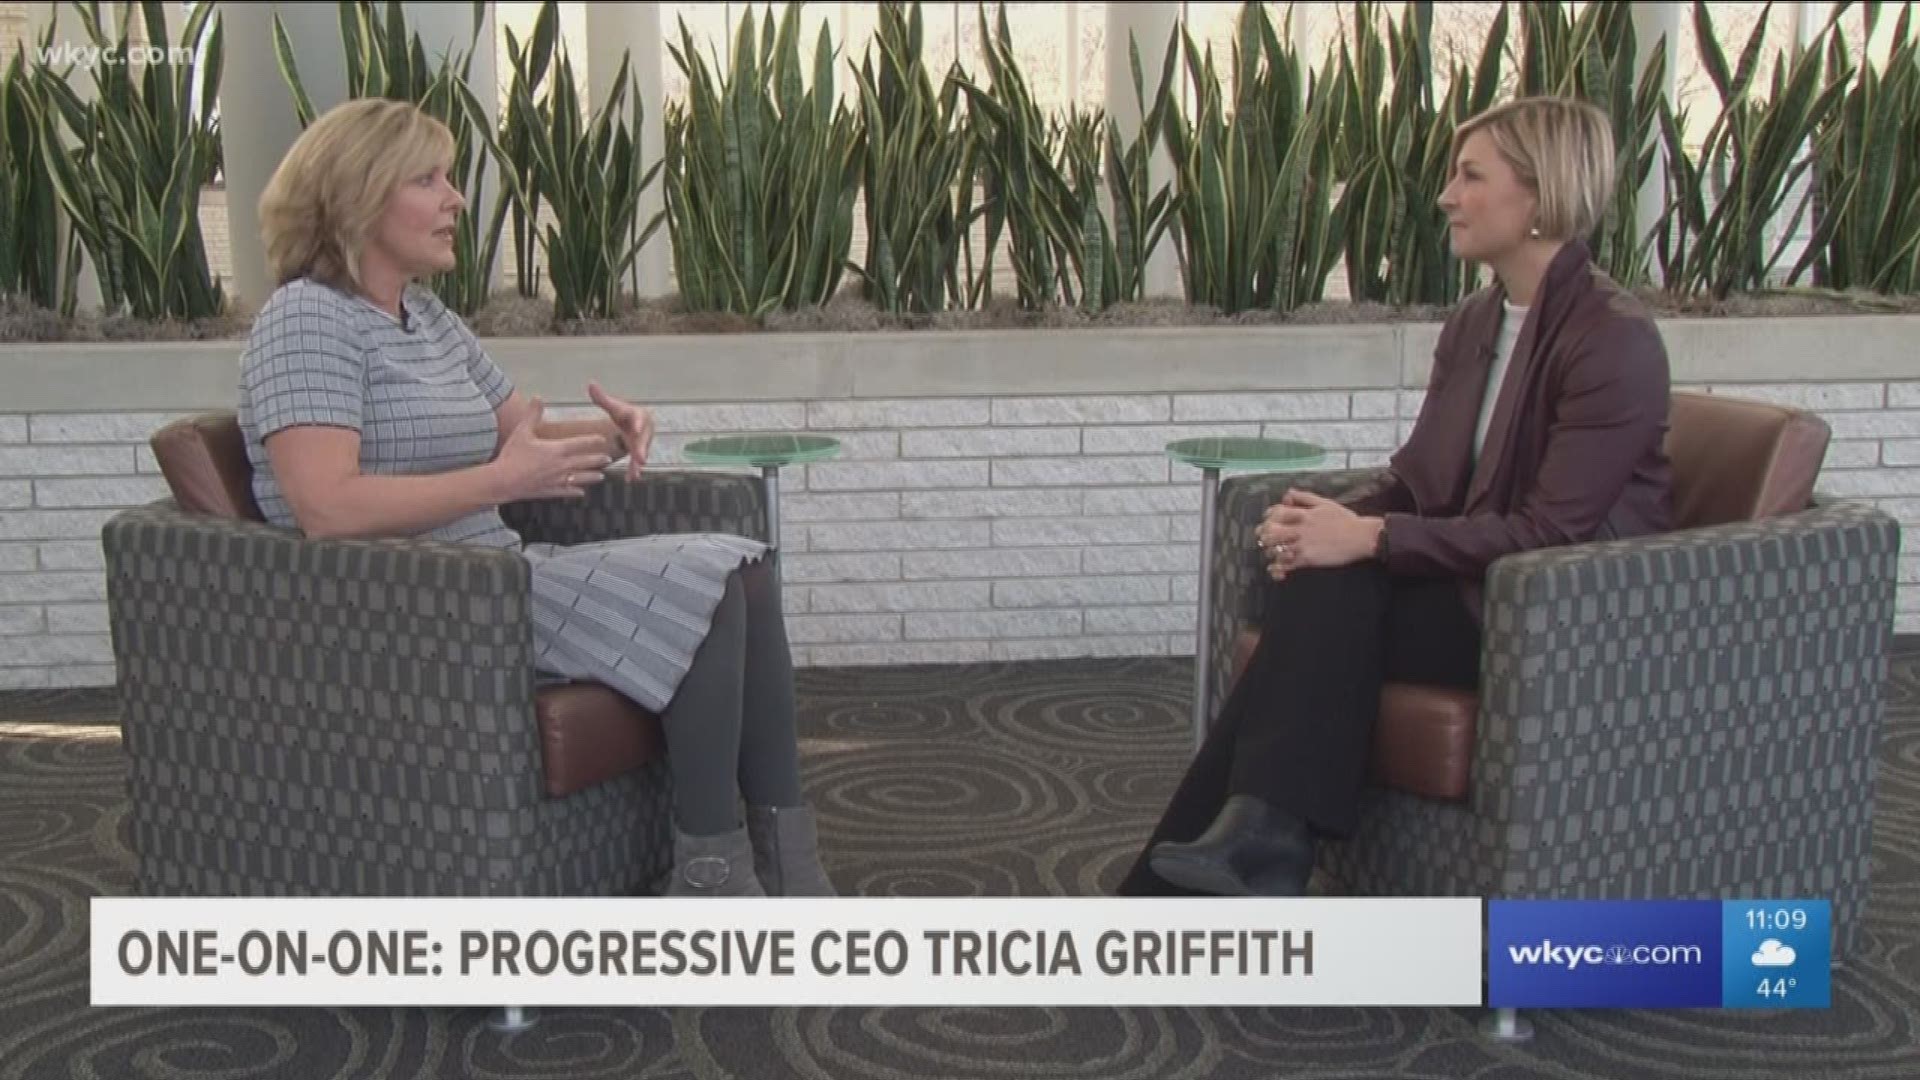 Growing faster than Apple, the insurance company Progressive continues to live up to its name. Sara Shookman speaks with the company's CEO.